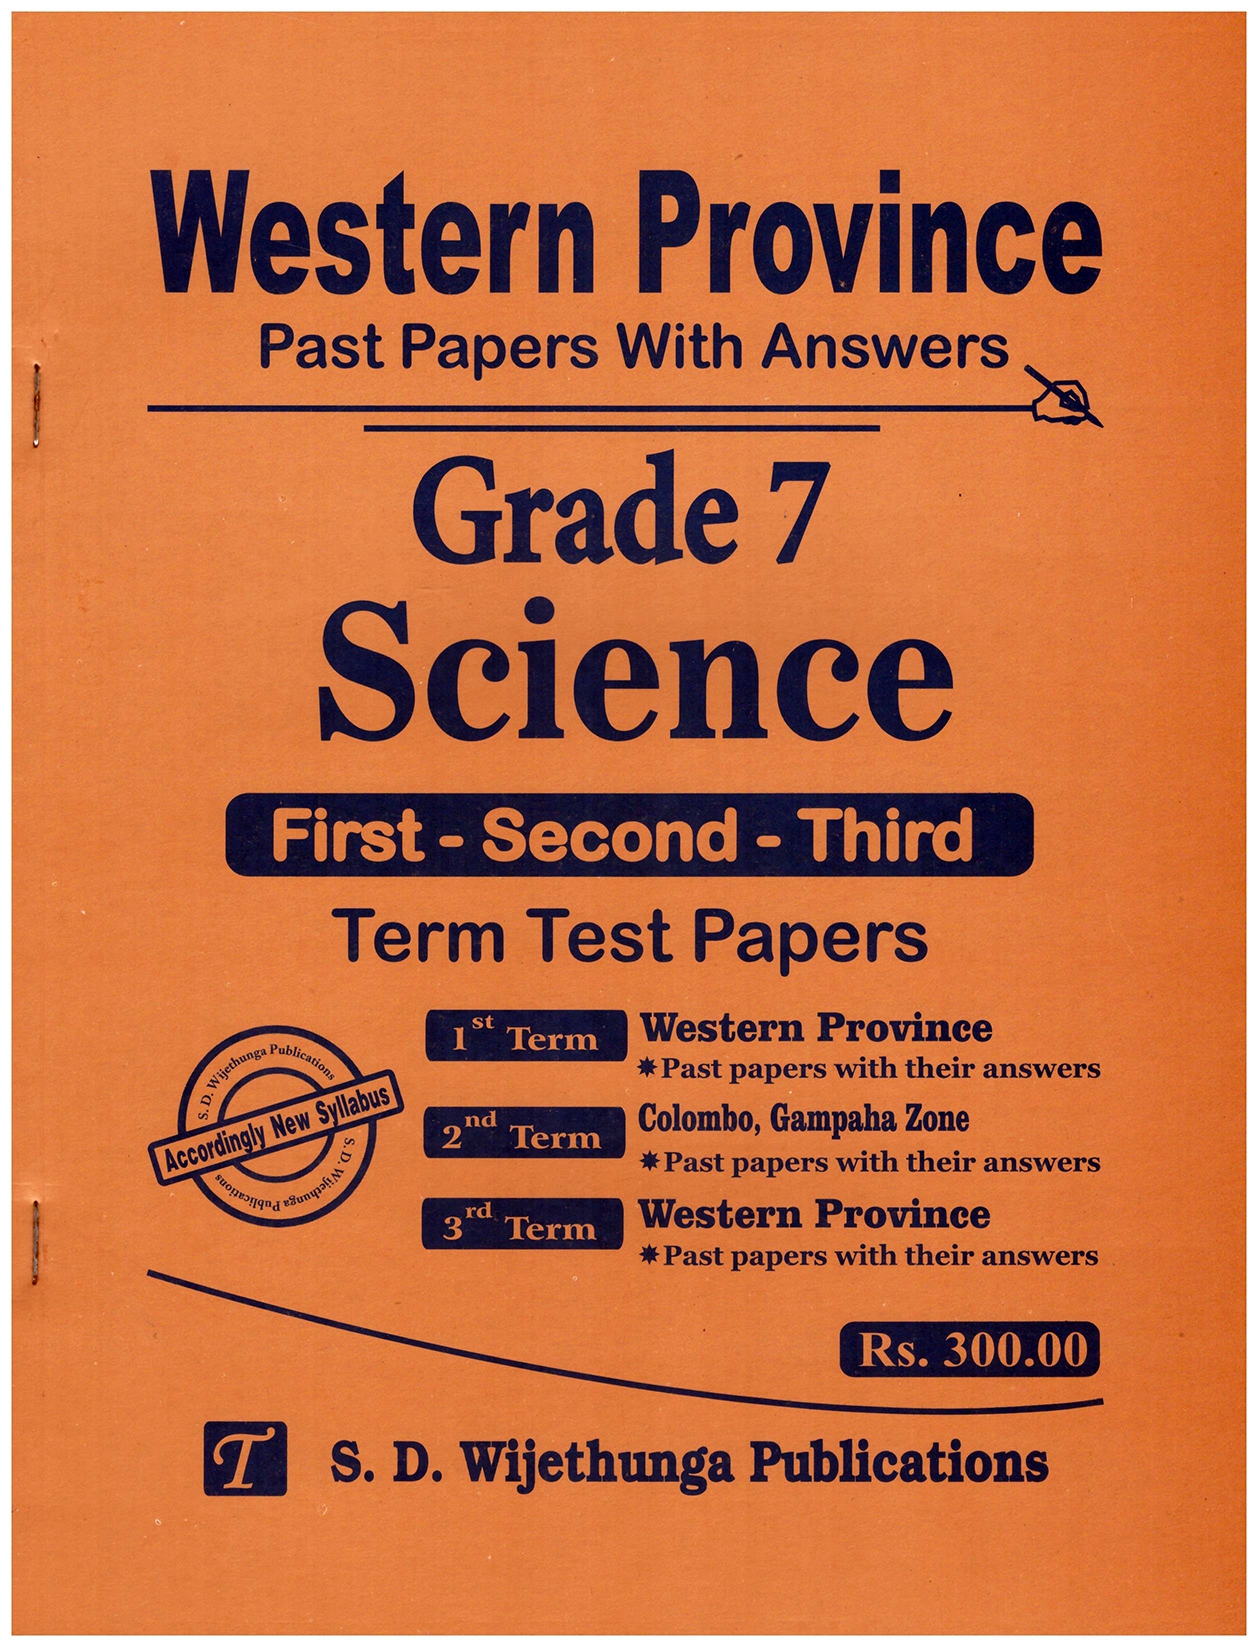 Western Province Past Papers with Answers Science Grade 07 First - Second - Third Term Test Papers